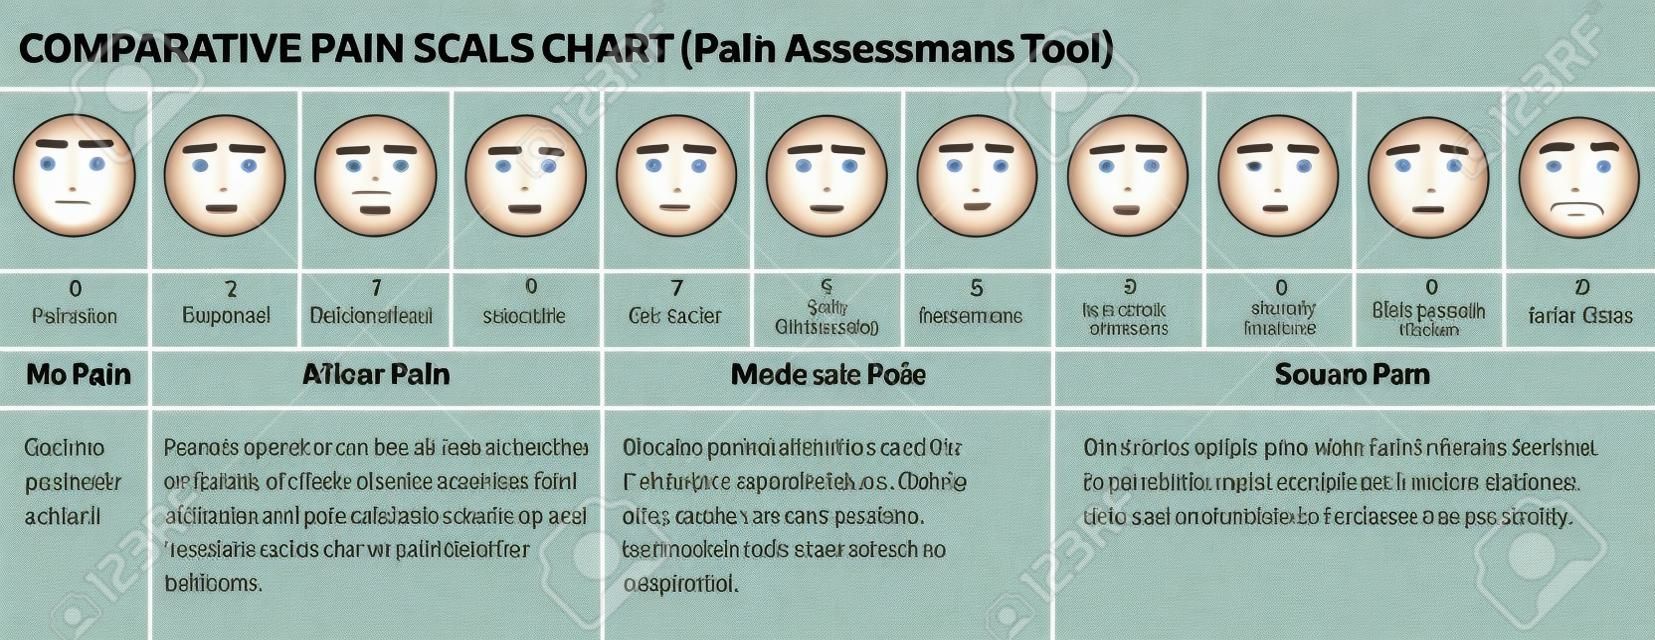 Faces pain scale. Doctors pain assessment scale. Comparative pain scale chart. Faces pain rating tool. Visual pain chart.